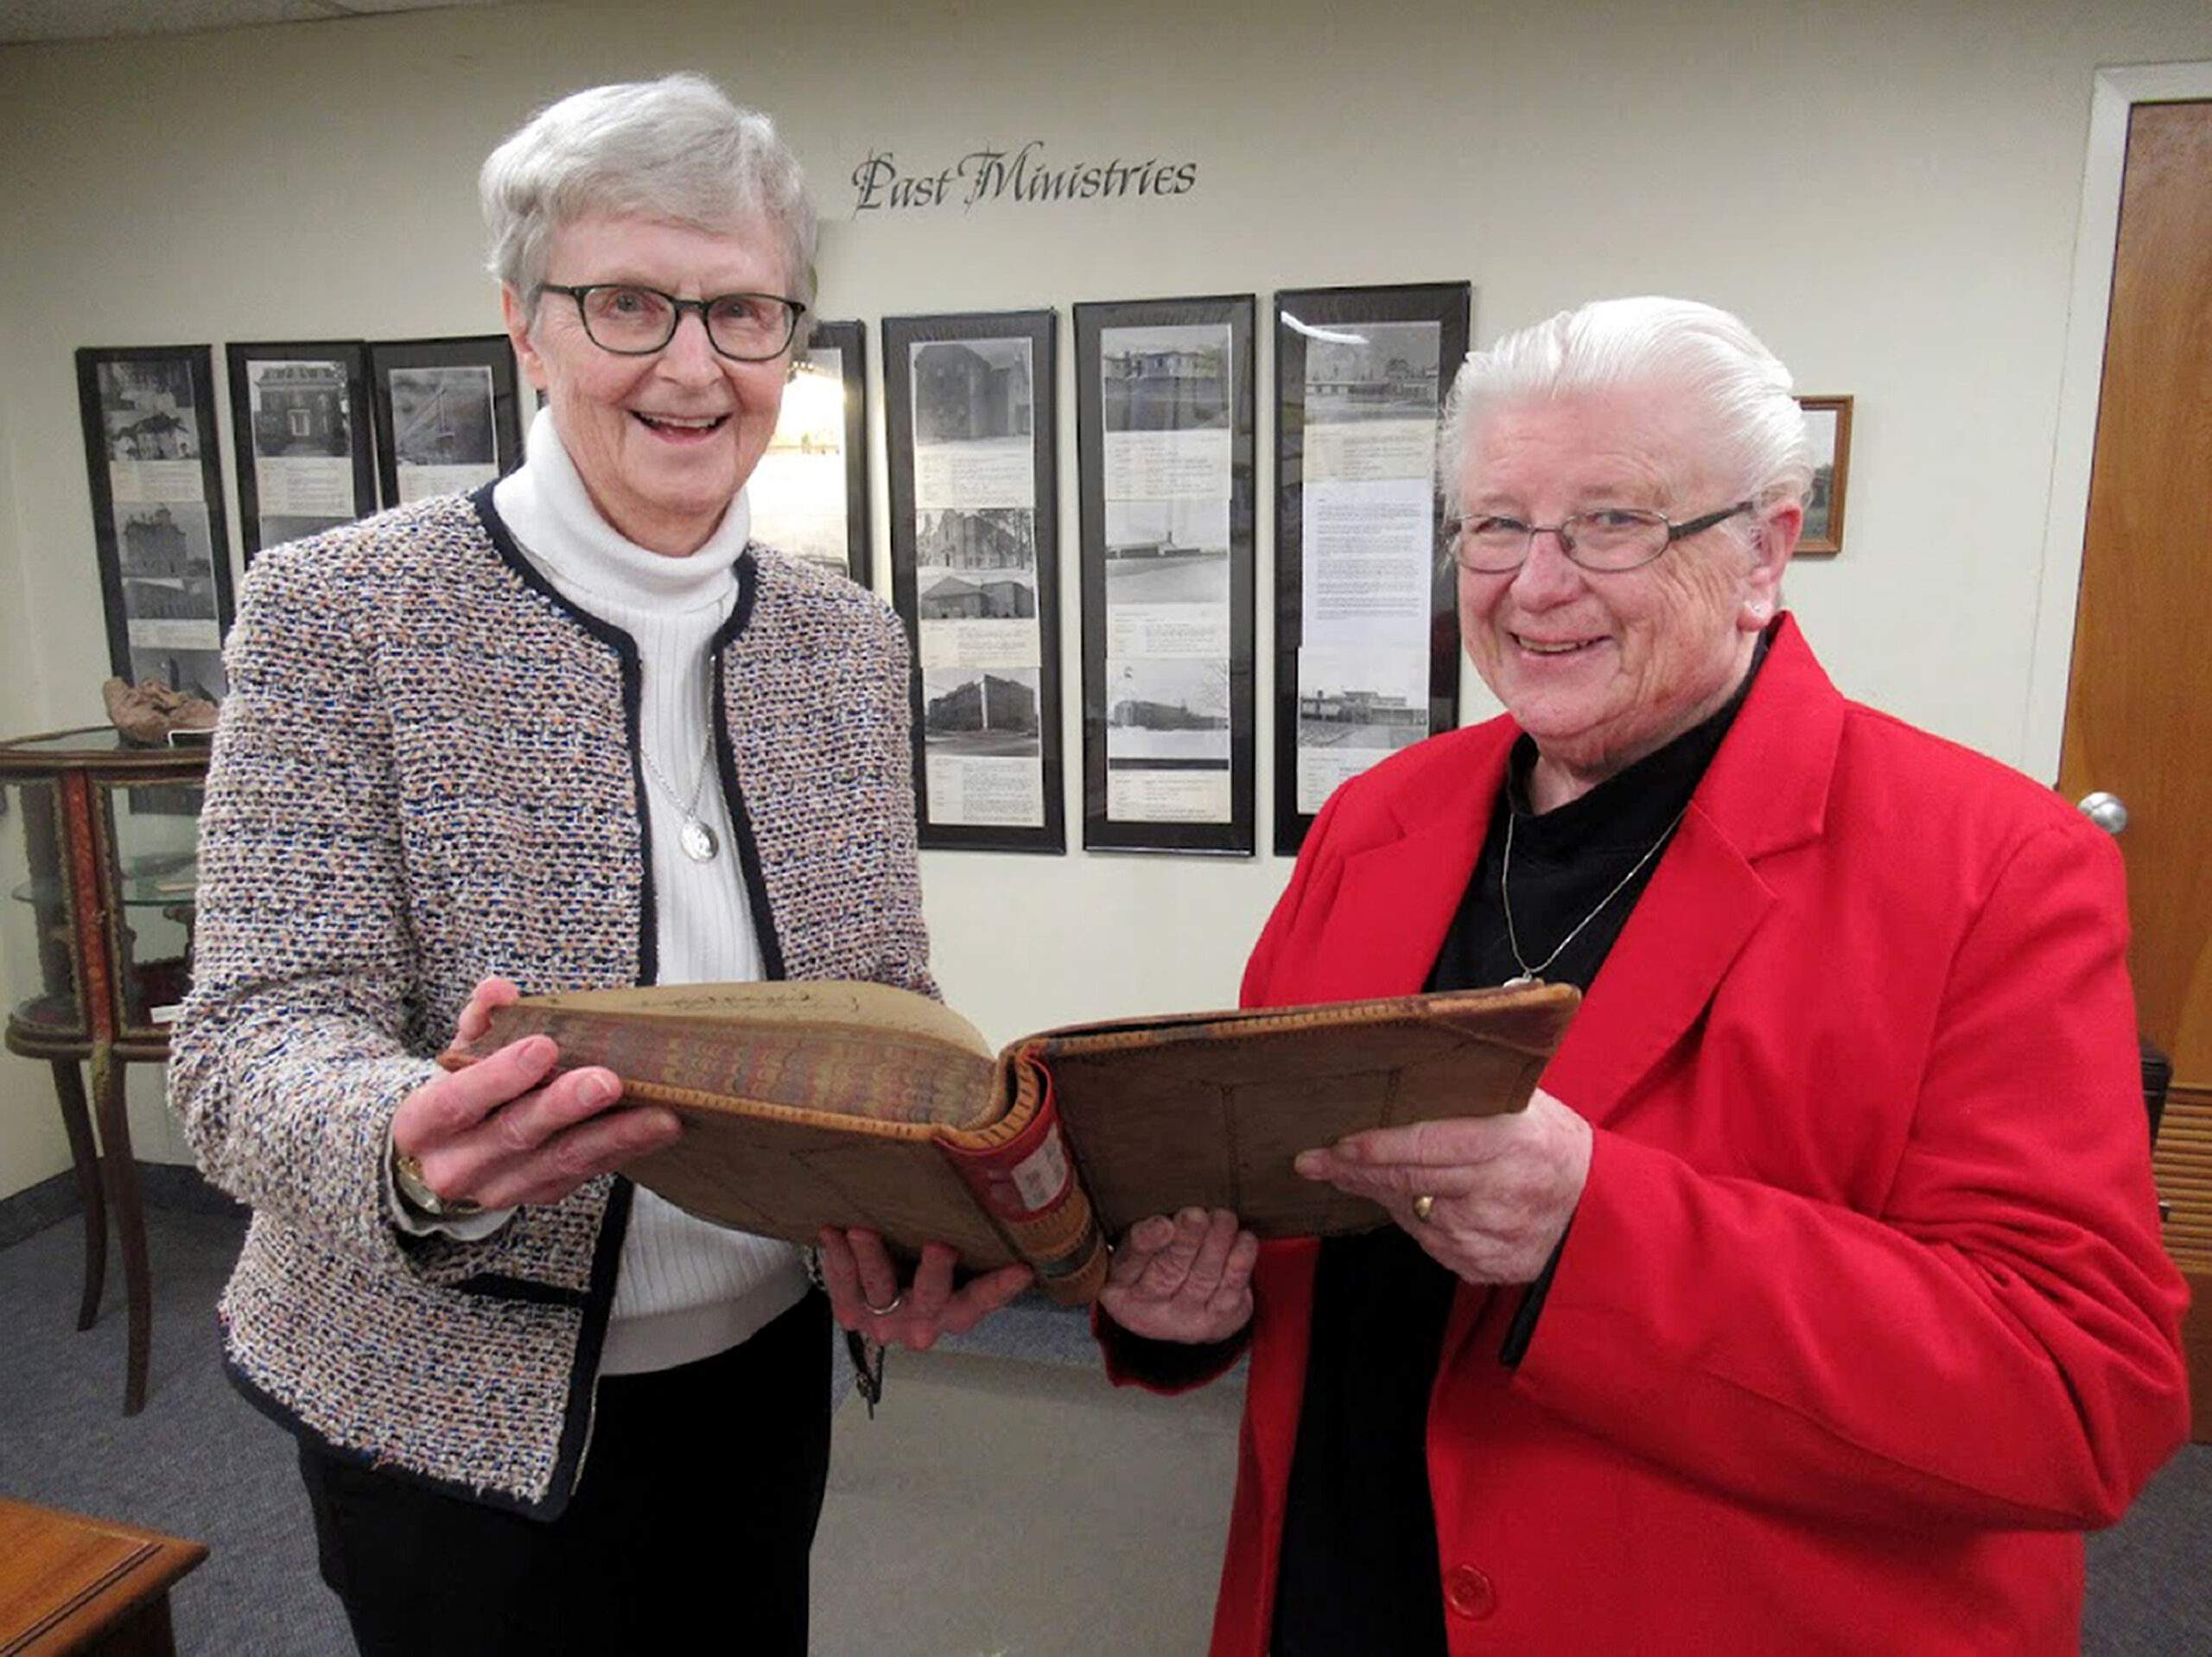 Ursuline Sisters Patricia McNicholas and Carole Suhar review materials from the archives of the Ursuline Sisters of Youngstown, in preparation for the anniversary.